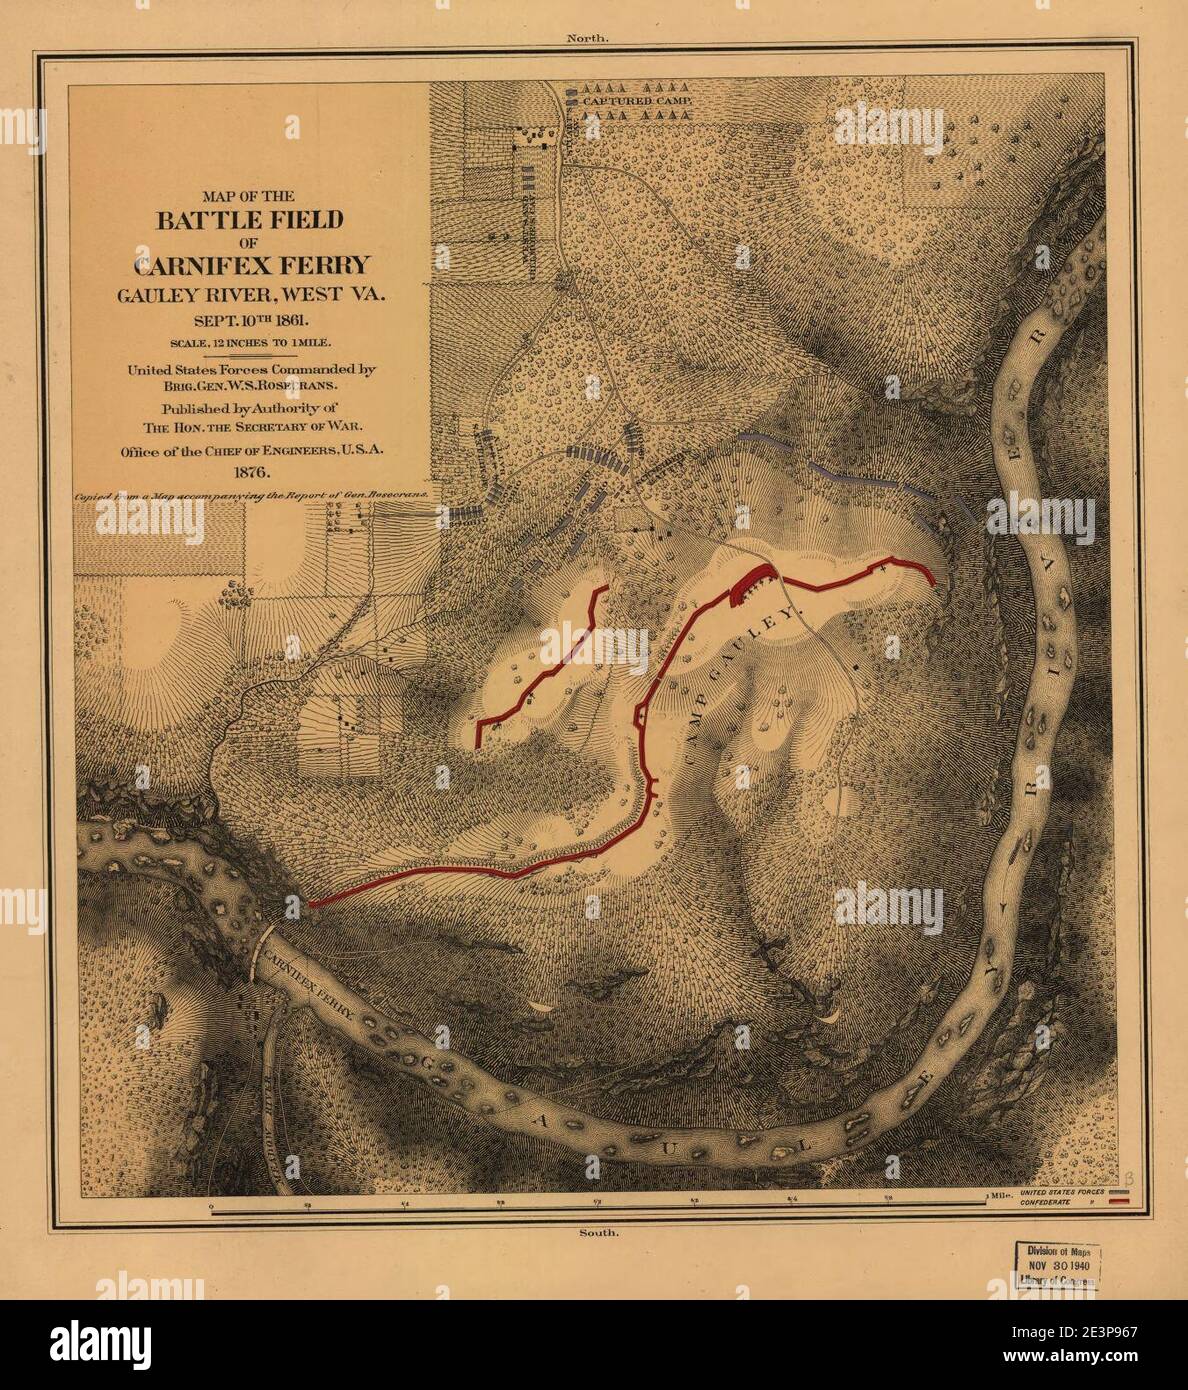 Map of the battle field of Carnifex Ferry, Gauley River, West Va., Sept. 10th 1861. United States forces commanded by Brig. Gen. W. S. Rosecrans Stock Photo